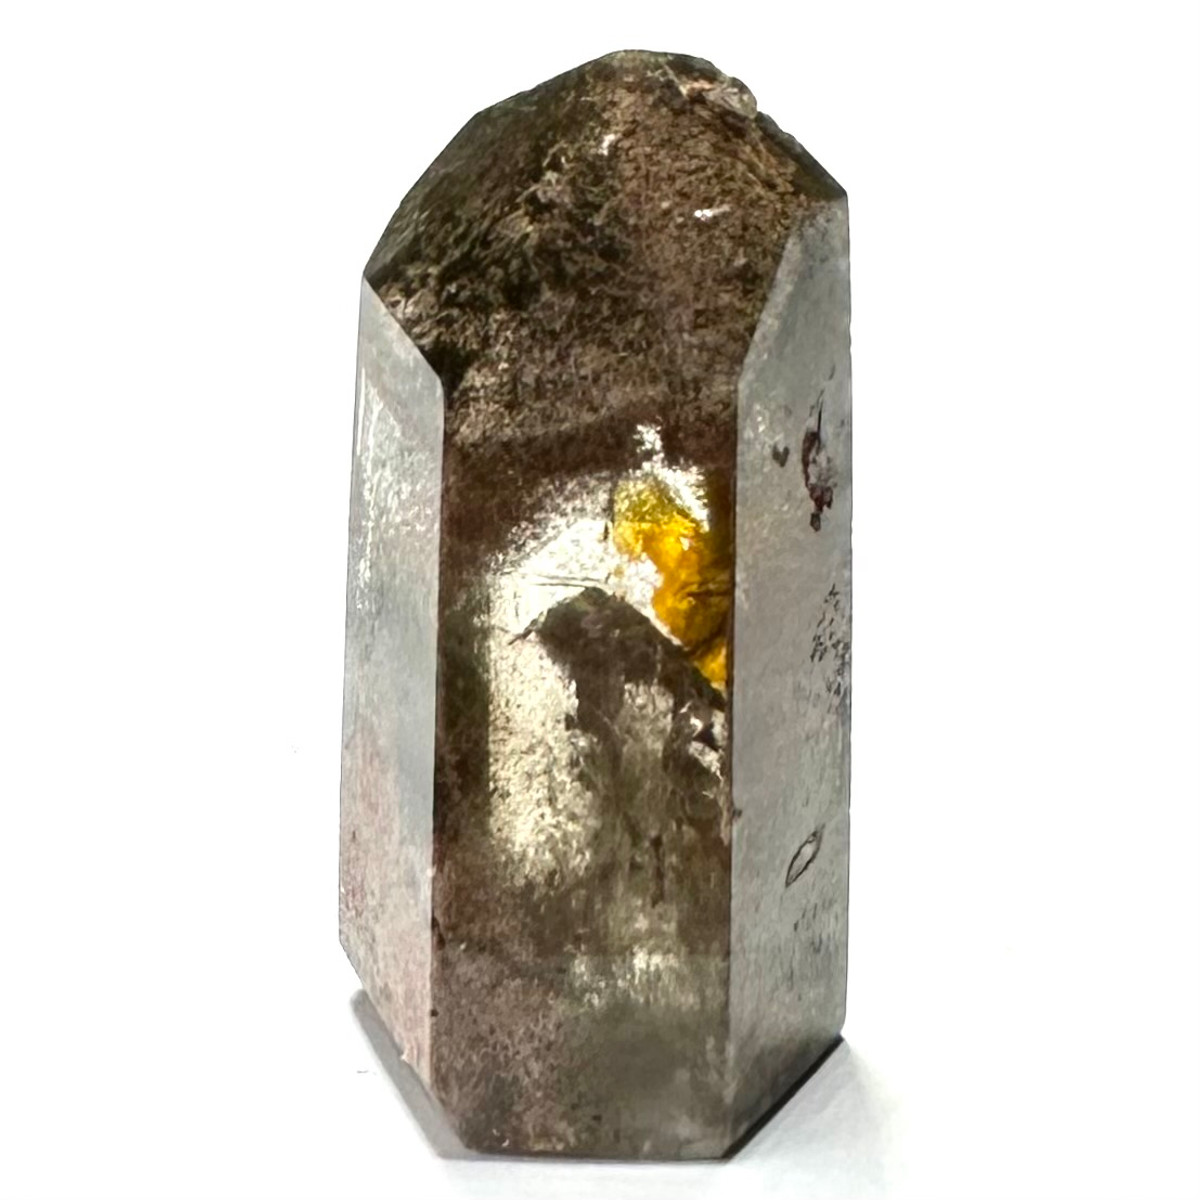 One of a Kind Smokey Quartz with Rainbow Inclusions Tower-1 3/4 x 3/4"